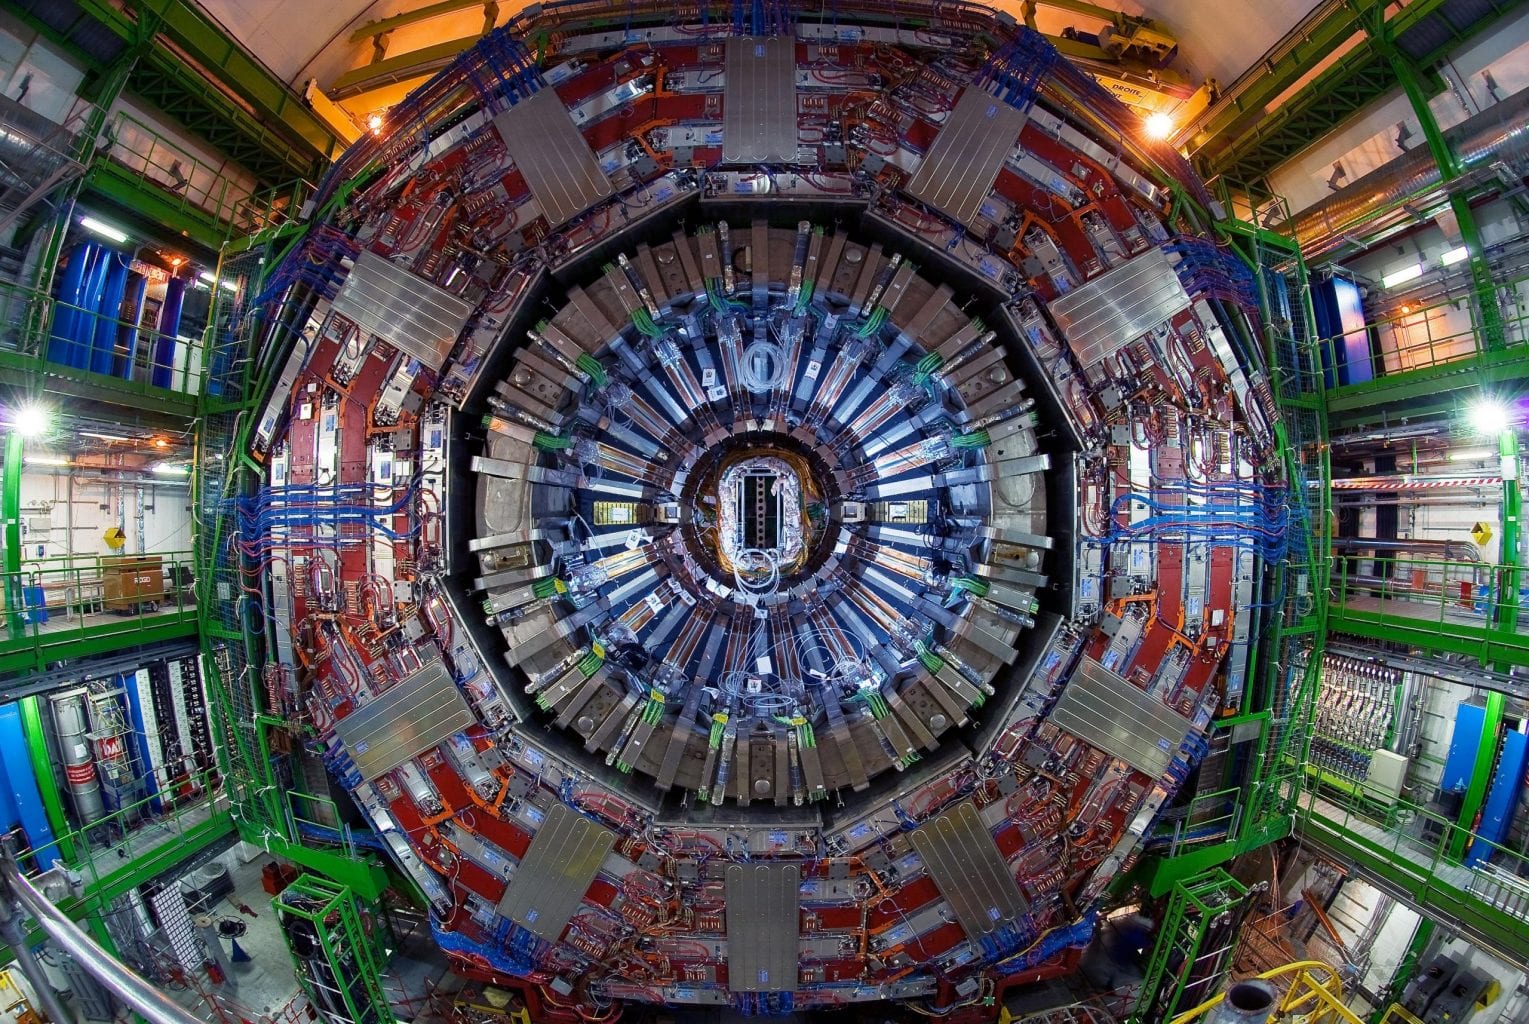 This is the "Compact Muon Solenoid" (CMS) detector which is part of the Large Hadron Collider. Credit: CERN